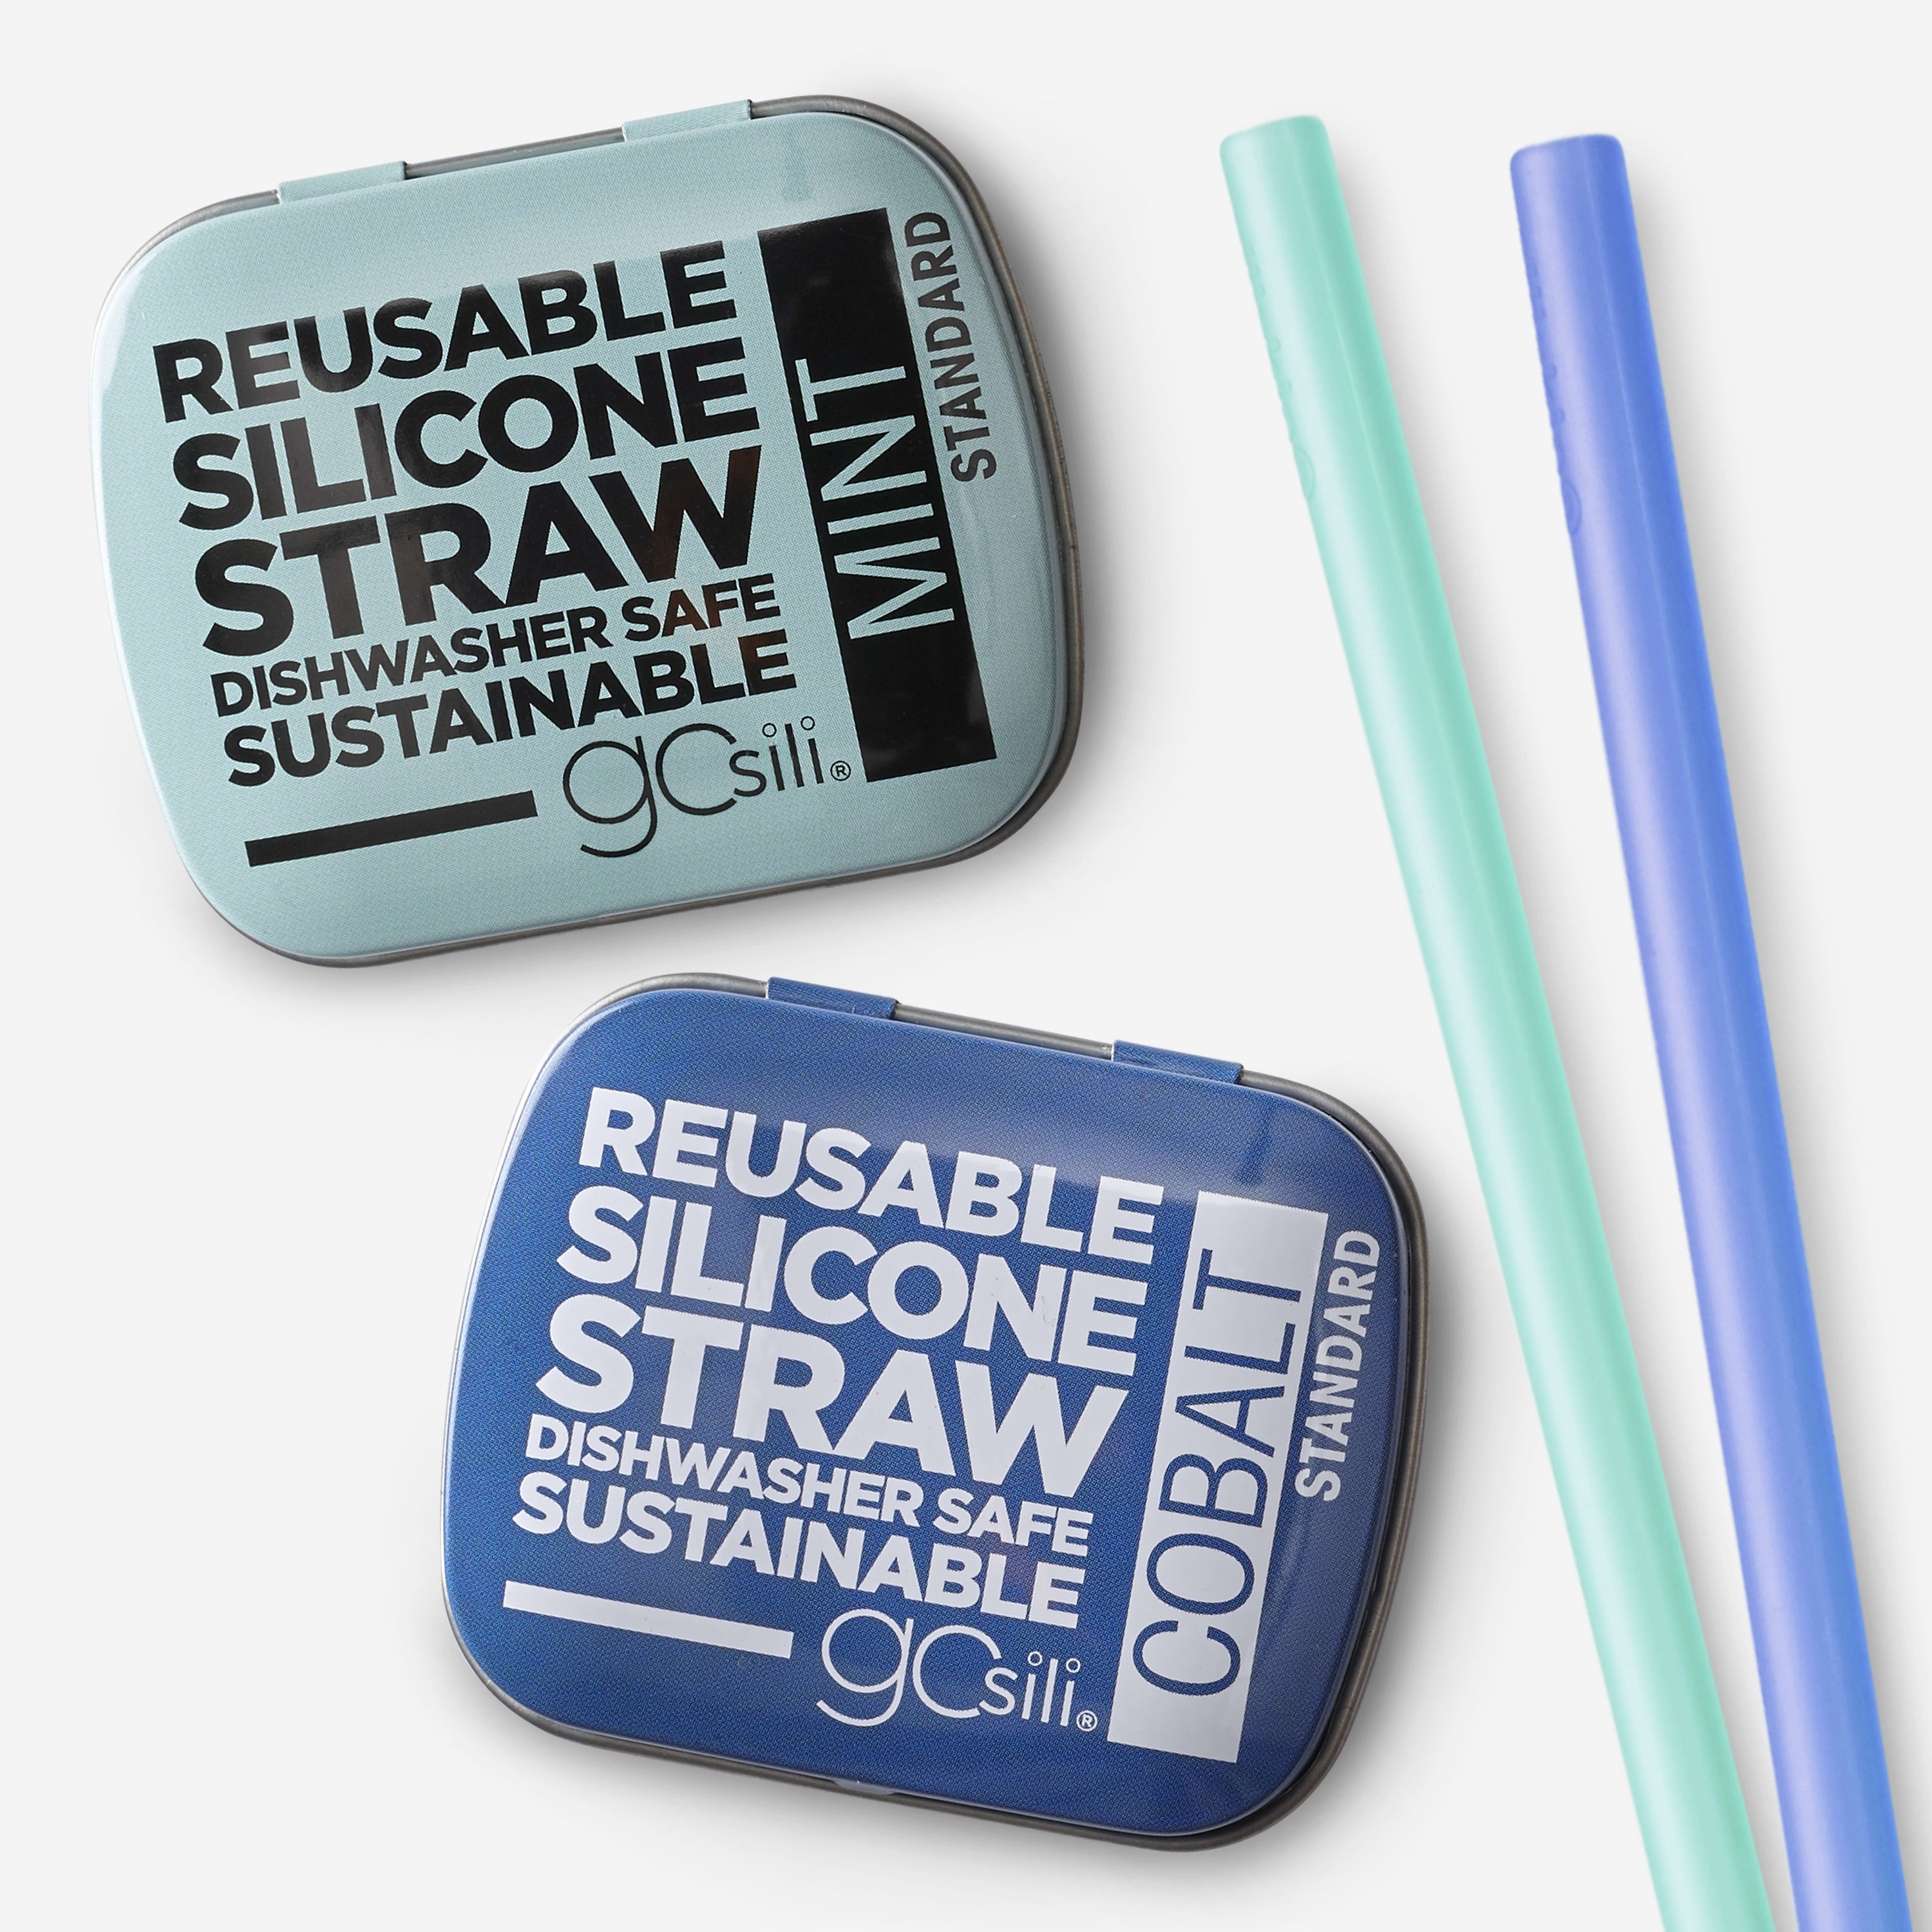 2 x His and Hers Collapsible Straw with Travel case (Stainless Steel) |  Pink and Blue Foldable Straws | Reusable Environmentally Friendly Drinking